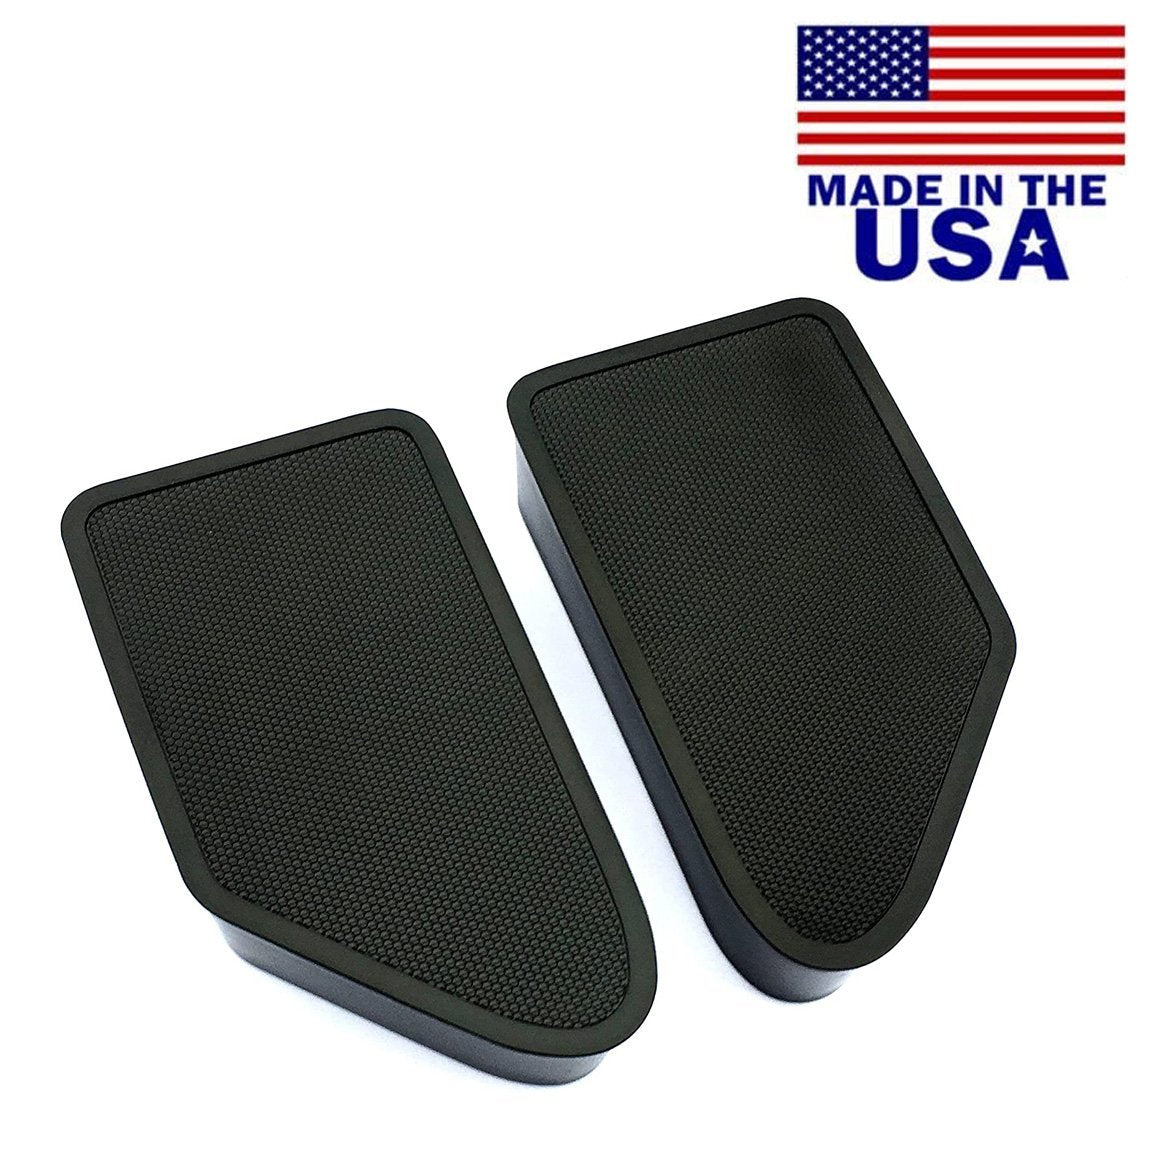 Made in the USA stake pocket covers for 2014-2018 Chevy Silverado and GMC Sierra pickup trucks